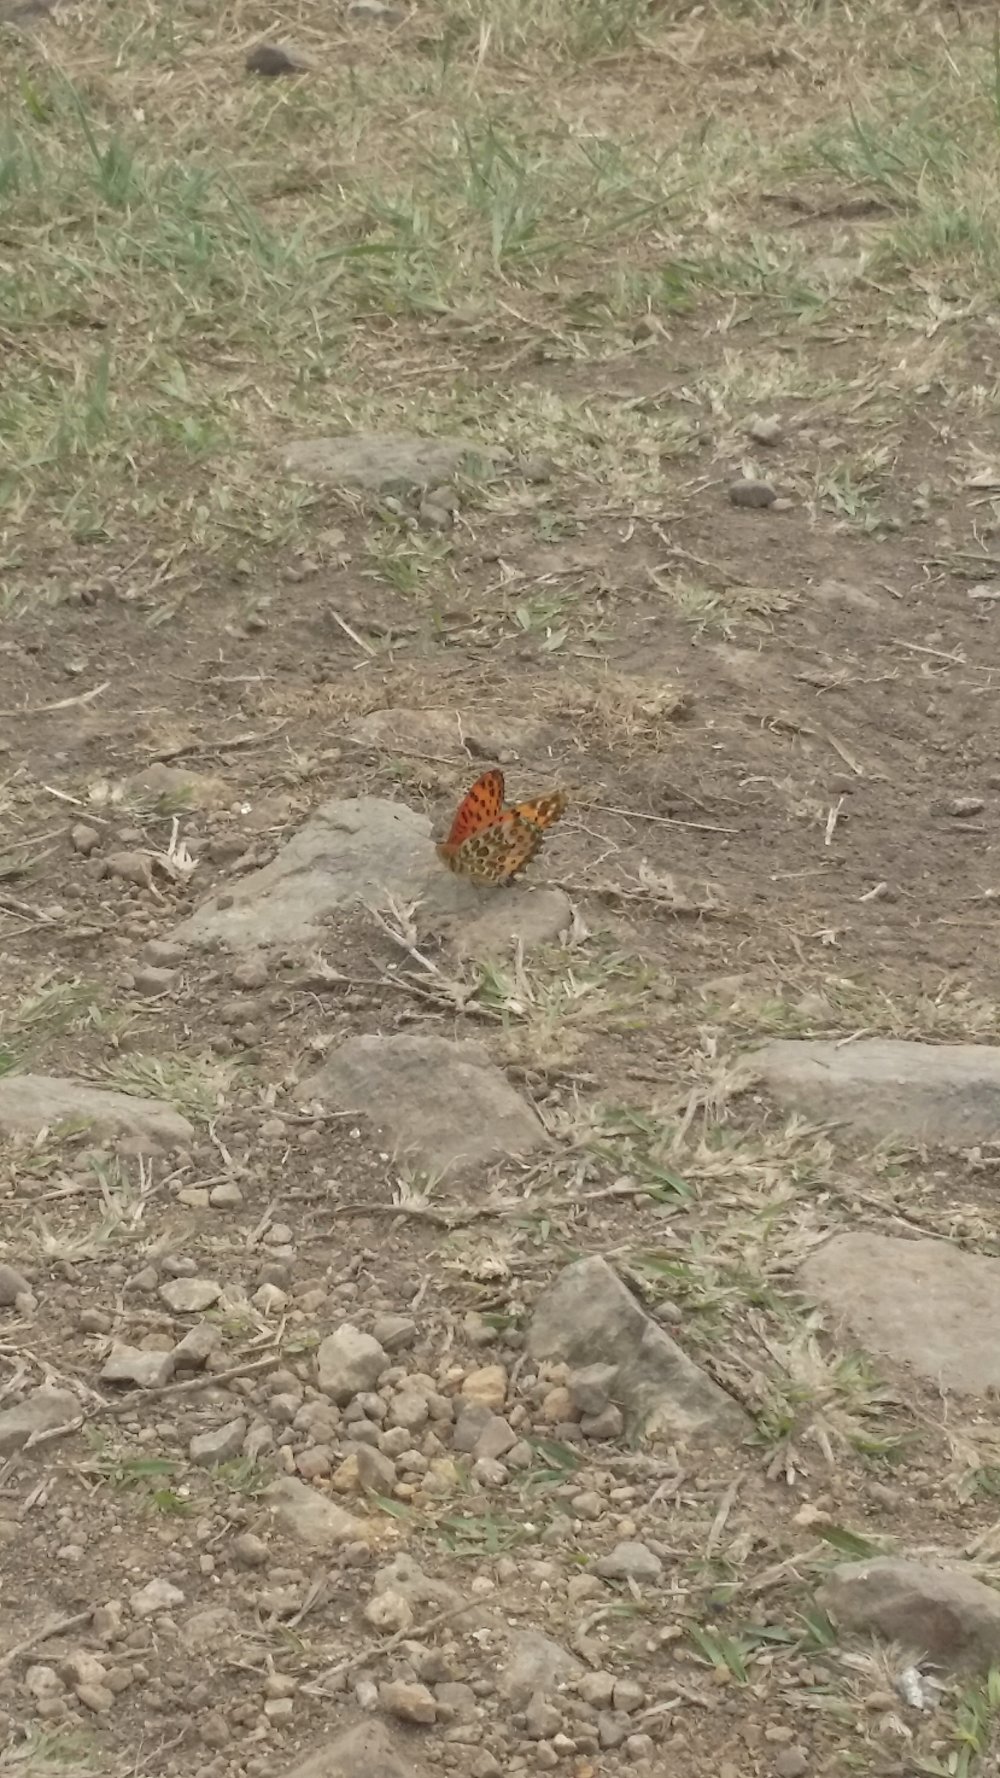 Spotted this beautiful butterfly